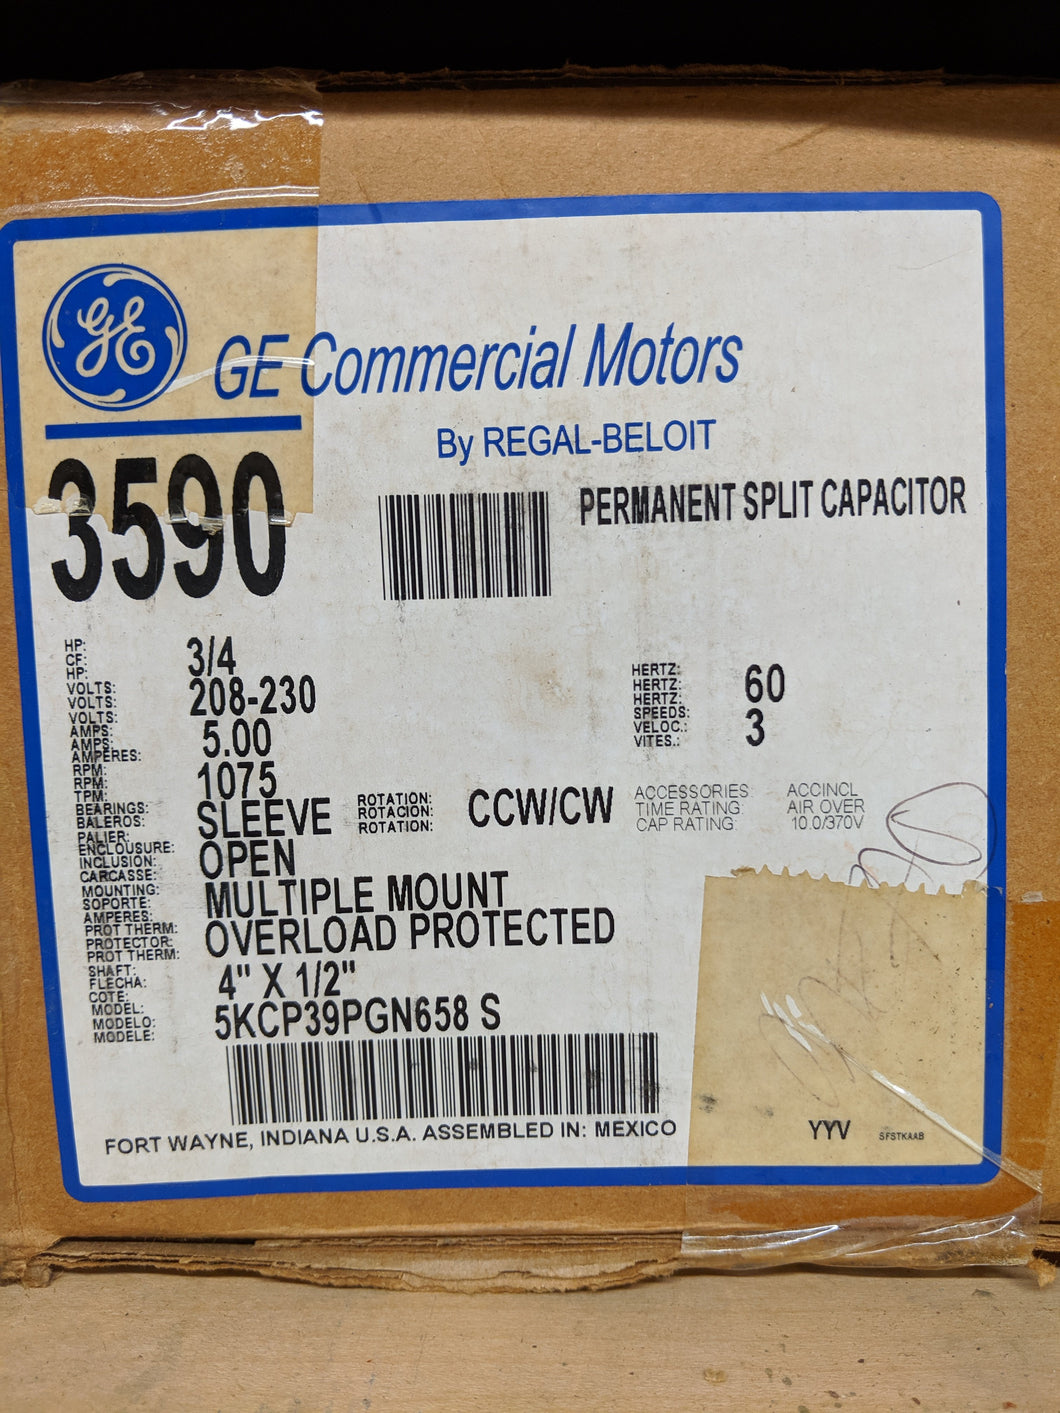 GE 3590, 3/4 HP, 208-230 Volts, 5KCP39PGN658S